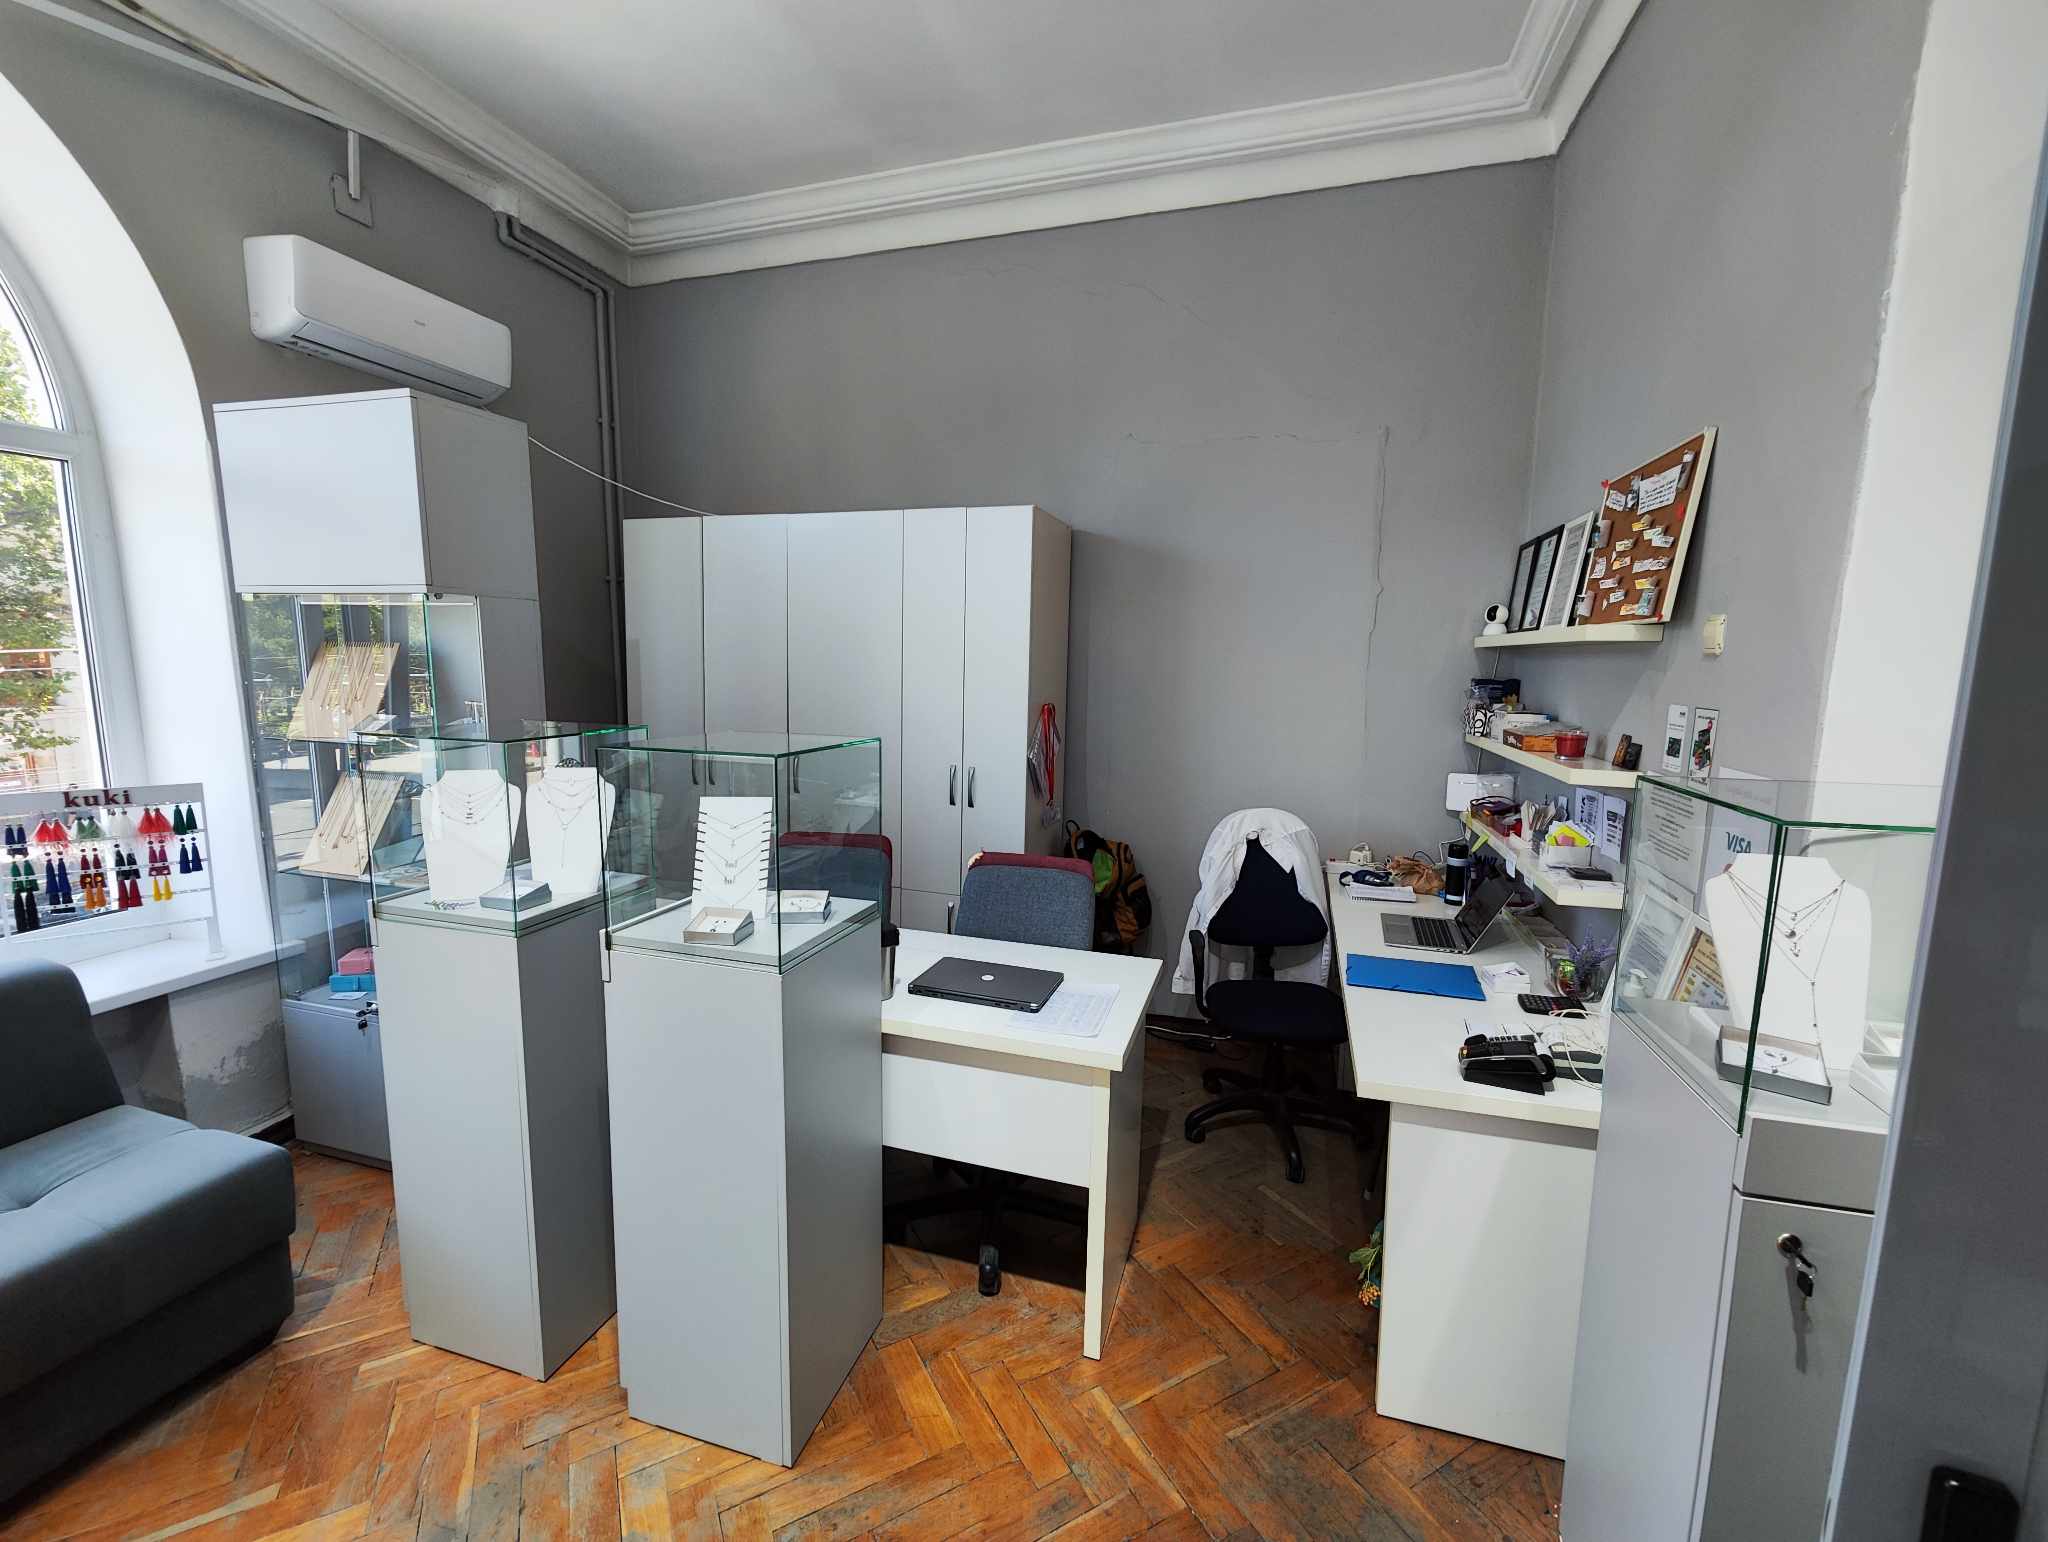 Picture of jewelry shop within an office area. 